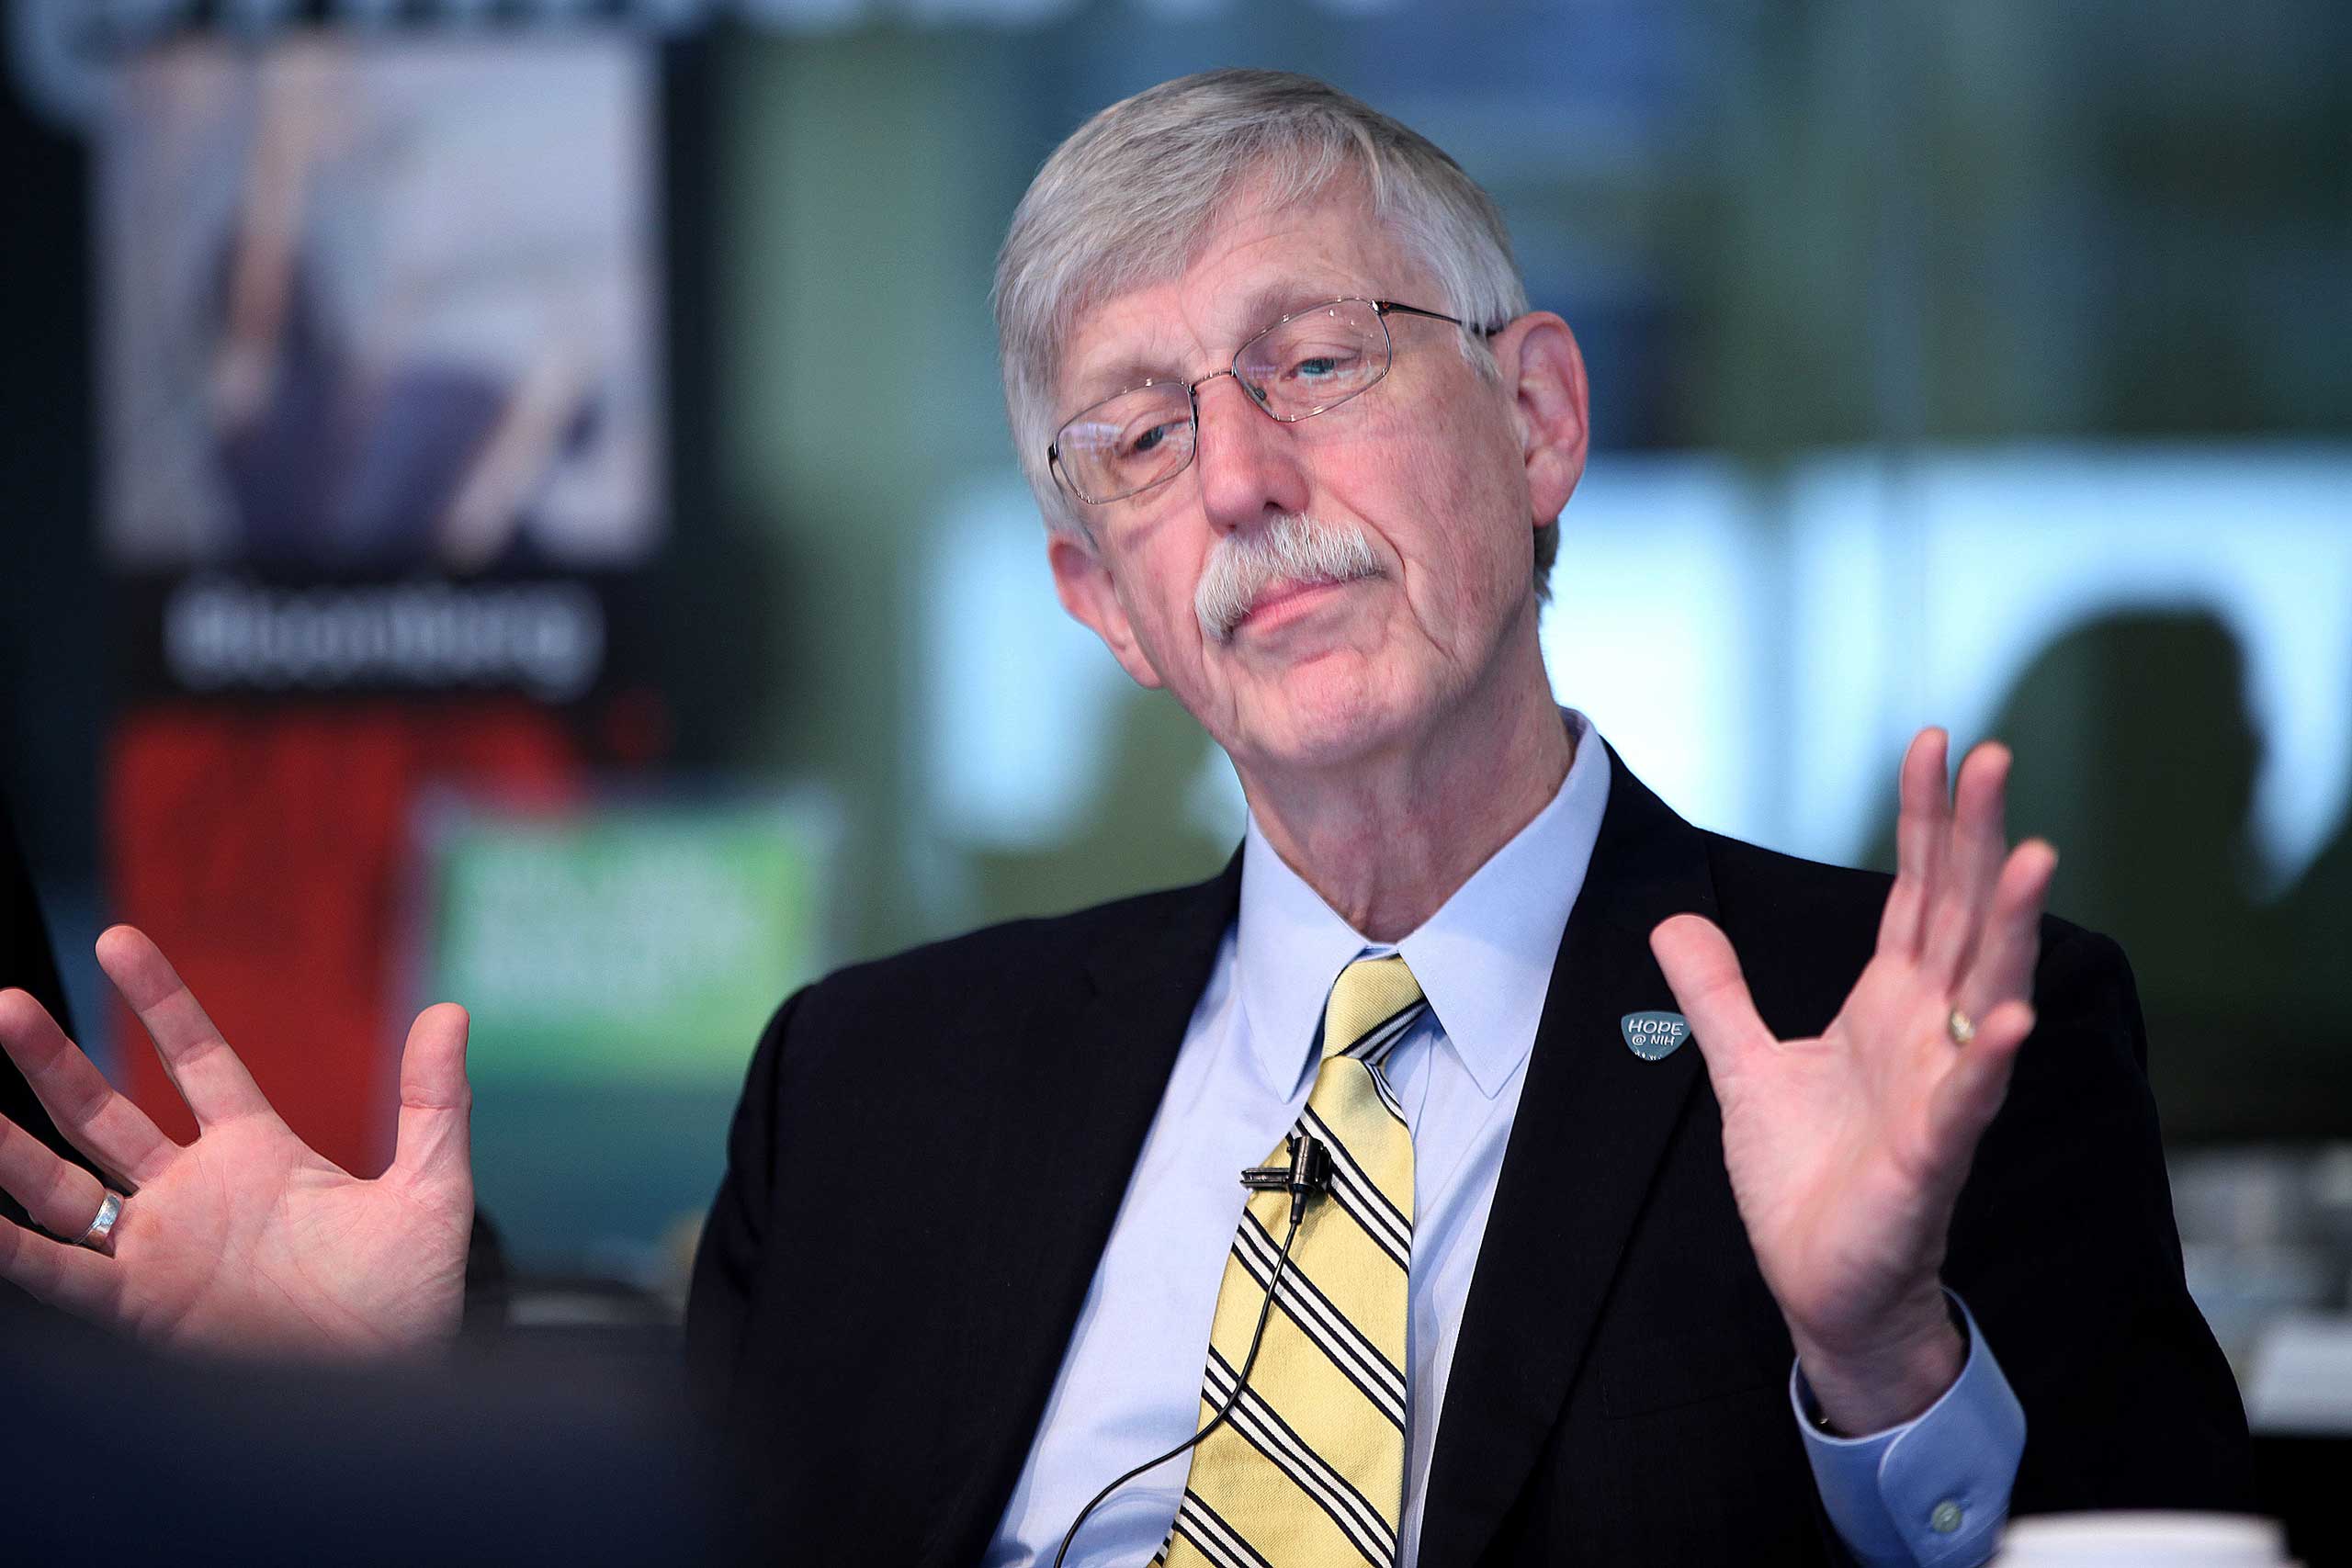 National Institutes of Health Director Francis Collins speaks during an interview in Washington on April 11, 2014. (Bloomberg/Getty Images)